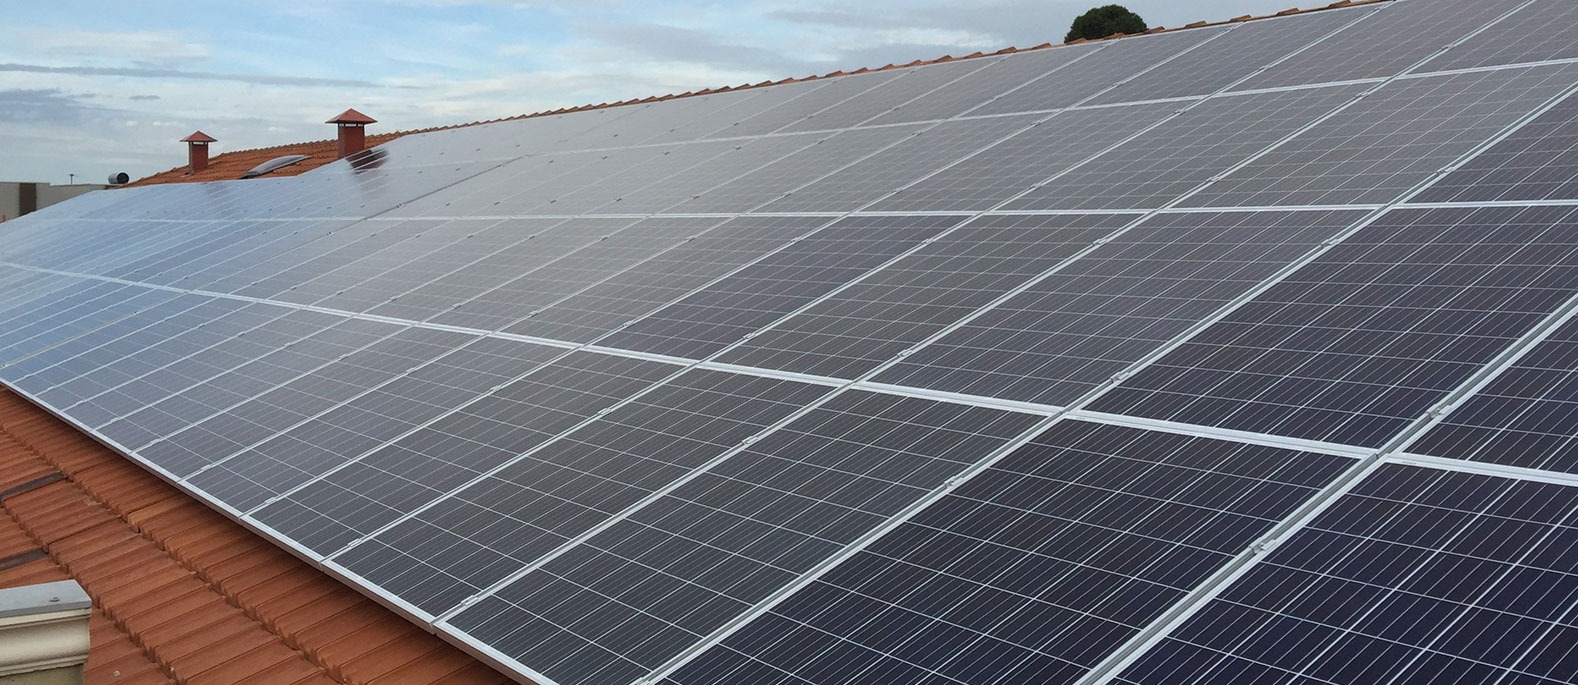 Breaking Down the Cost of Commercial Solar Panels in Perth in 2020 Telegraph